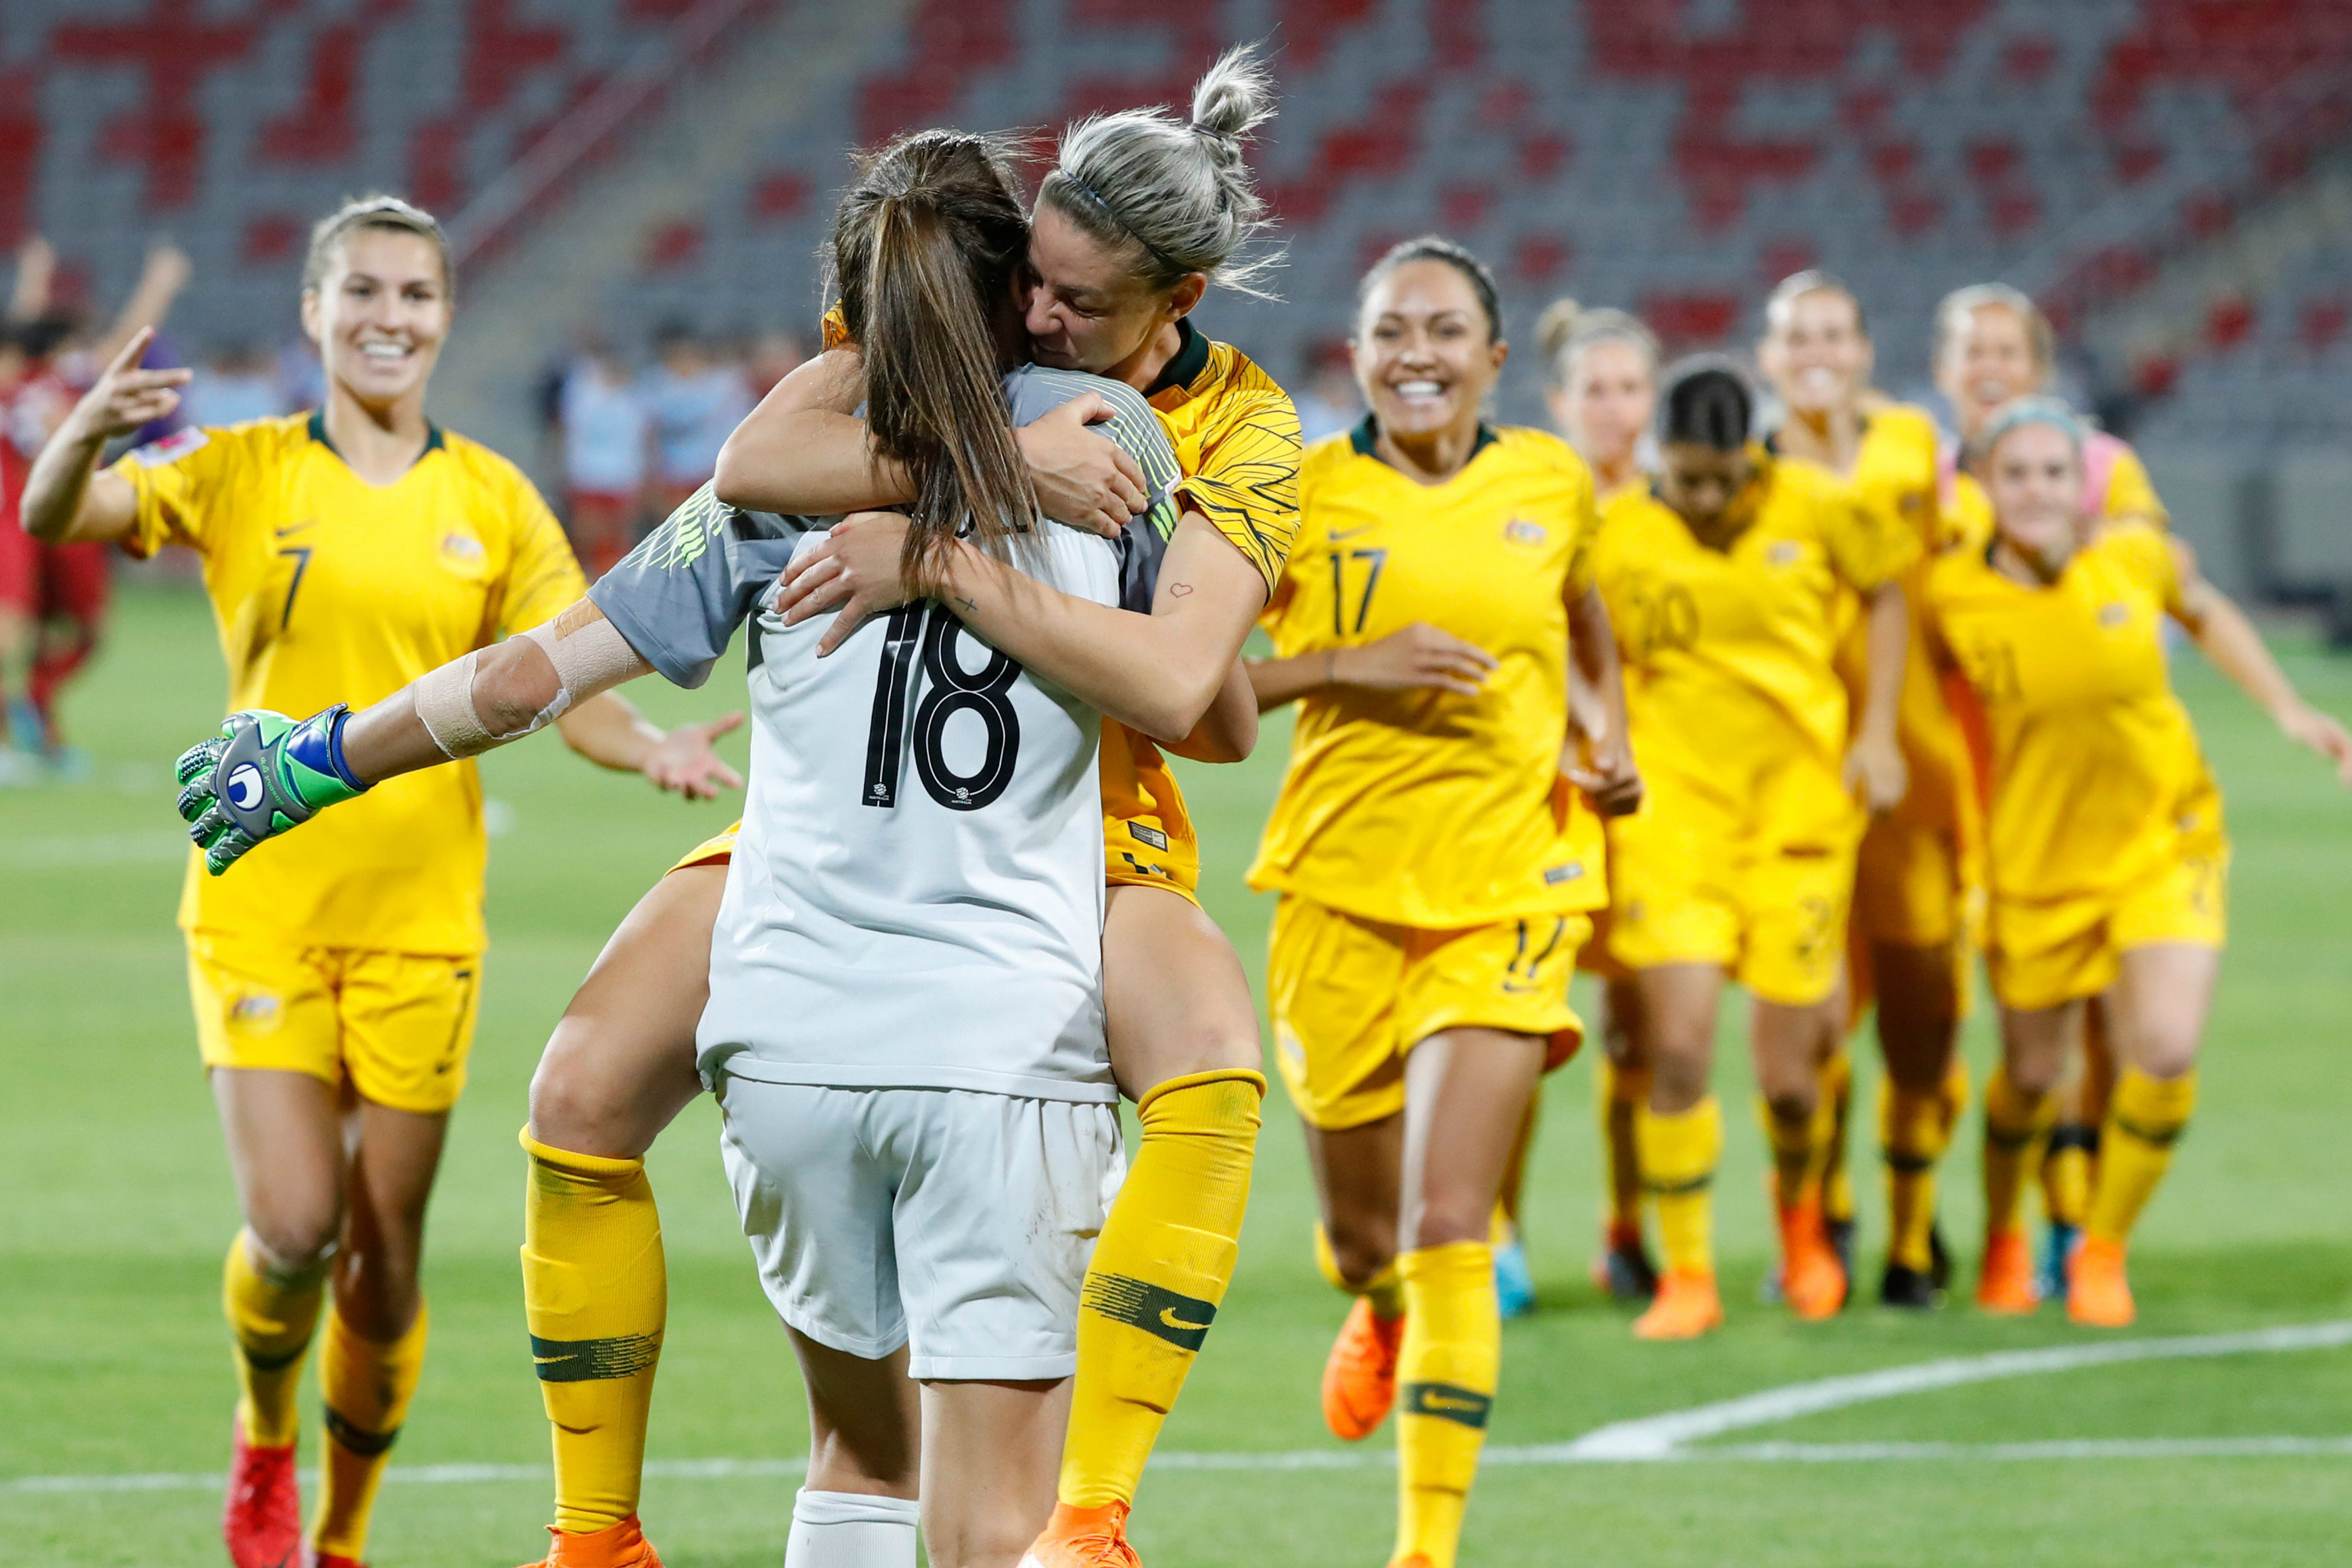 The Westfield Matildas celebrate their win over Thailand at the 2018 Asian Cup